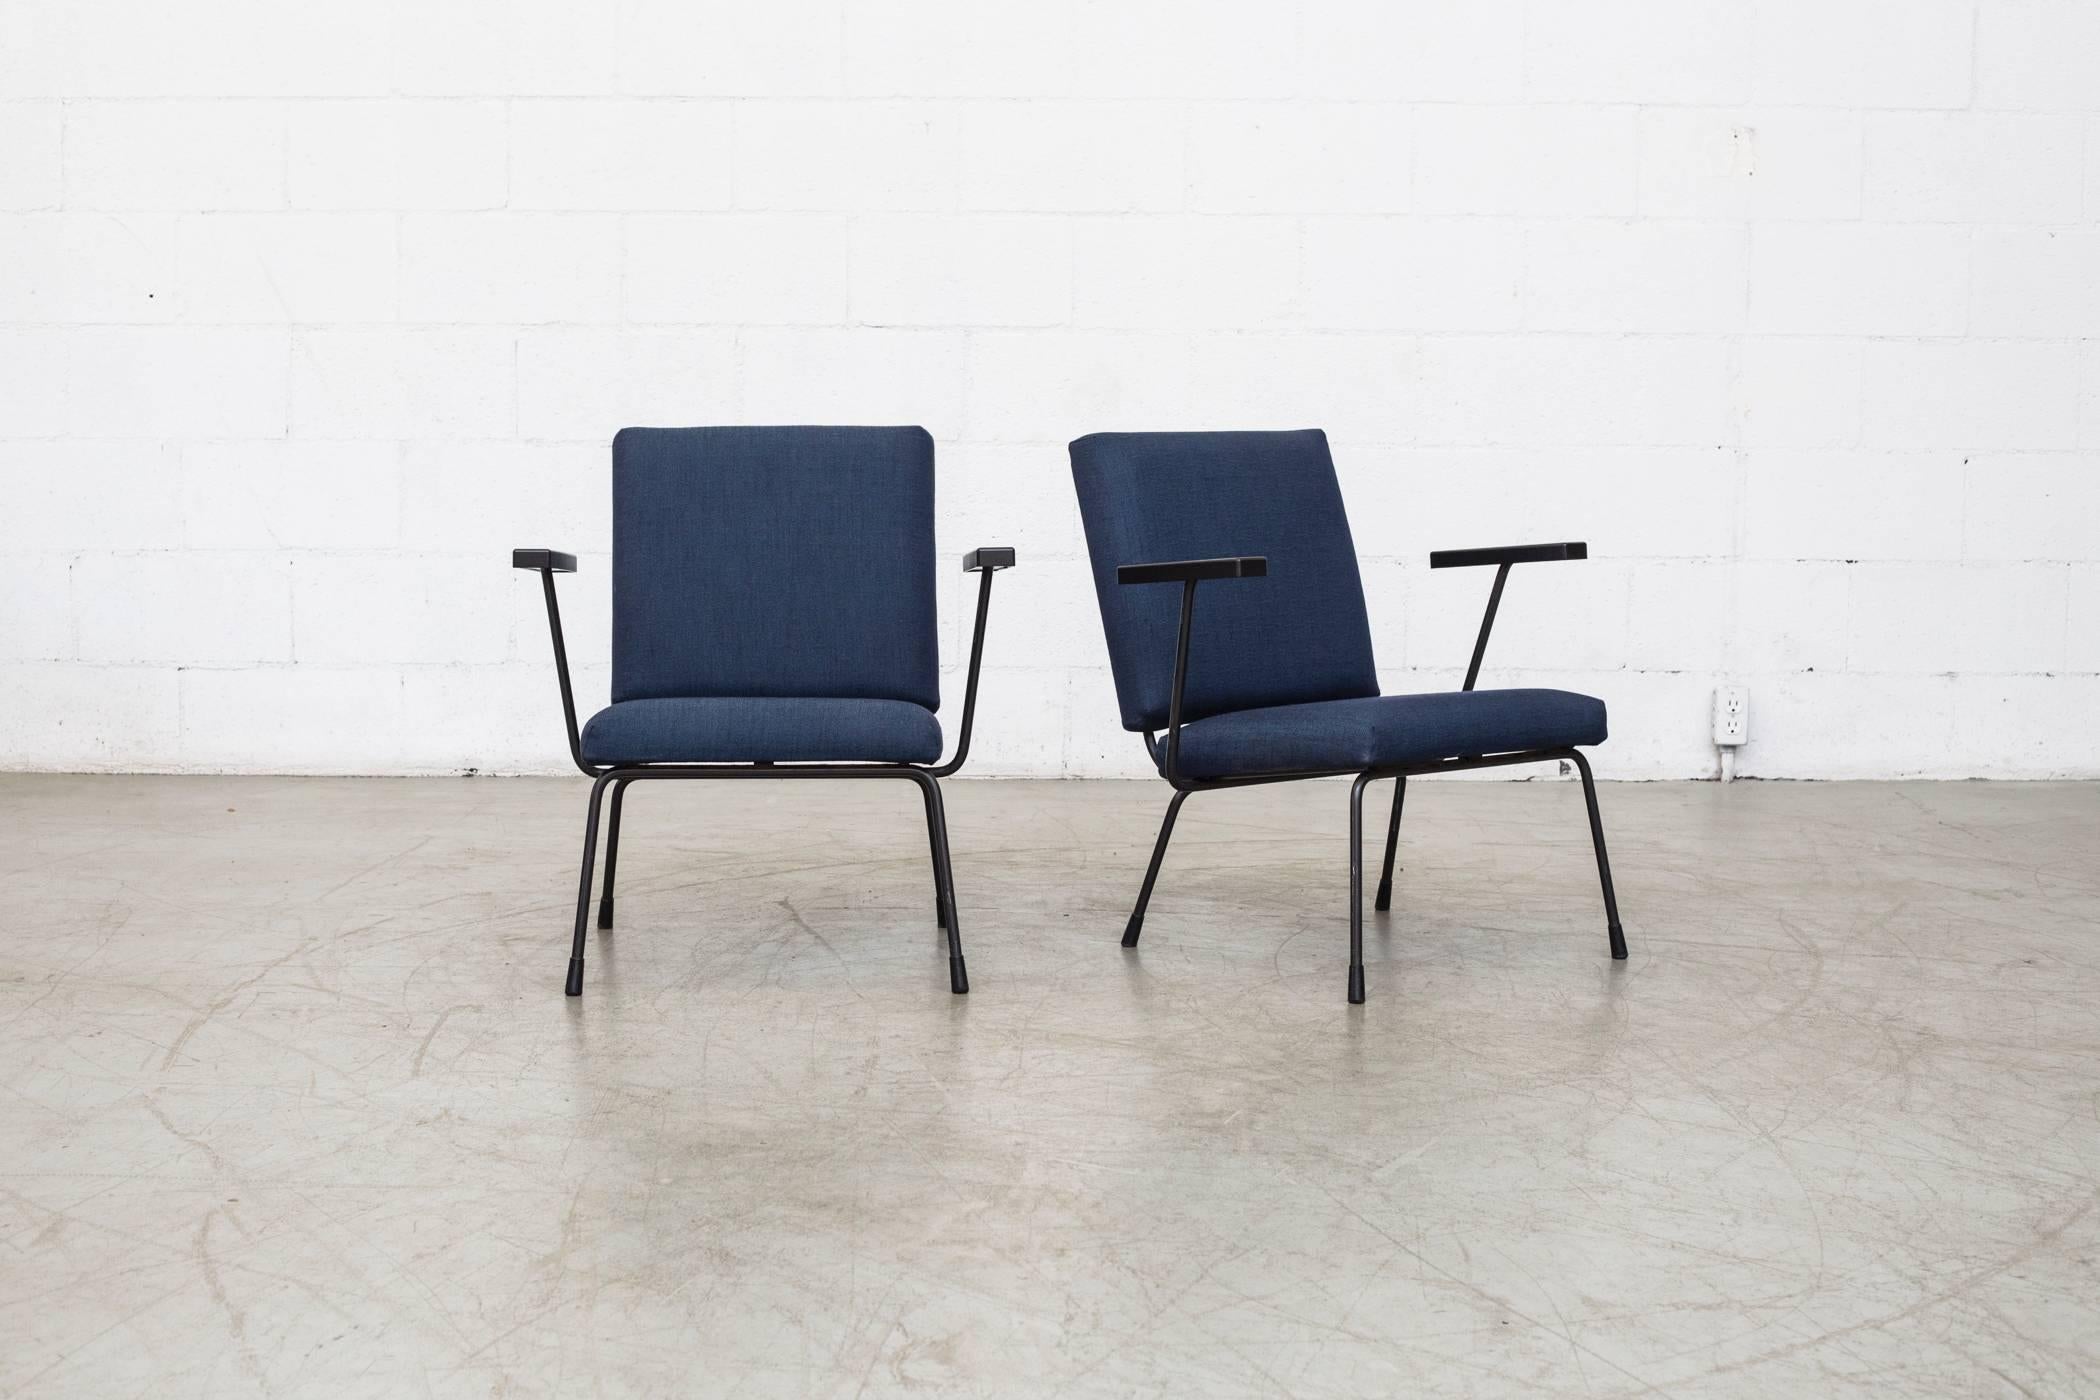 Black enameled steel frame with bakelite armrests. Newly reupholstered in navy. Good original condition. Set price. Others available, listed separately.